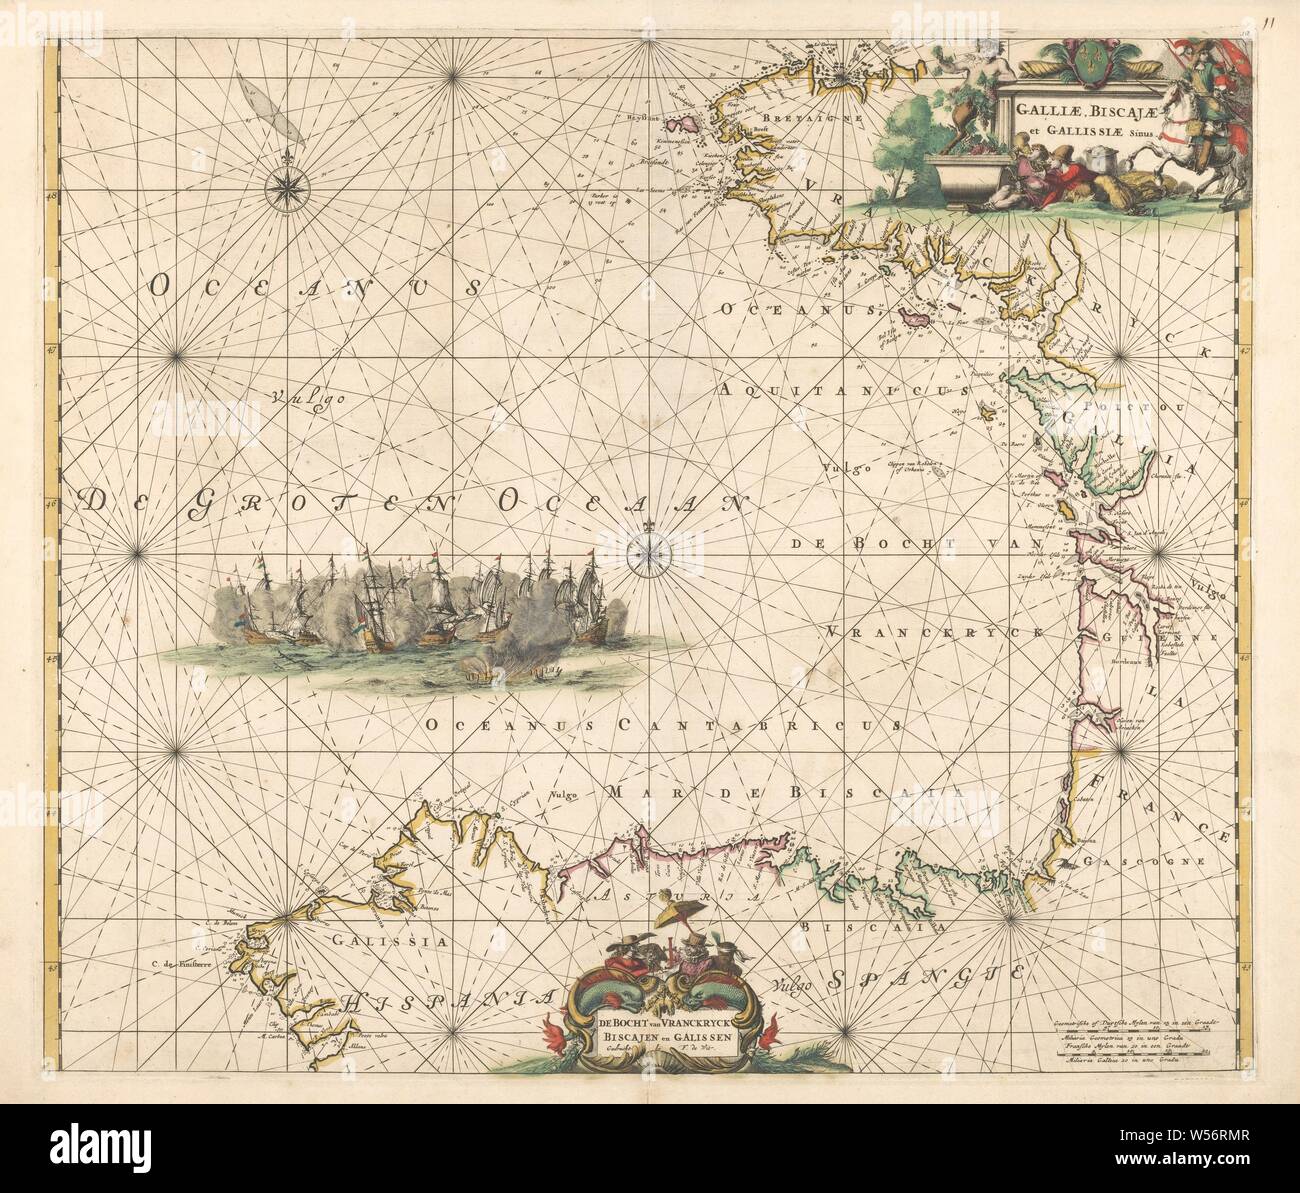 Sea chart of the Bay of Biscay, The Bay of Vranckryck Biscay and Galissen / Galliae, Biscajae et Gallissiae (title on object), the Atlantic coast between Brittany and north-west Spain. In the sea two compass roses and a battle with Dutch ships. Top right a cartouche with the Latin title decorated with the French coat of arms, a horseman, two men who eat and drink and a satyr with bunches of grapes. Bottom center a cartouche with the Dutch title. This cartouche decorated with fish, the Golden Fleece and various Spaniards. Bottom right two scale sticks in German and French miles. Numbered top Stock Photo